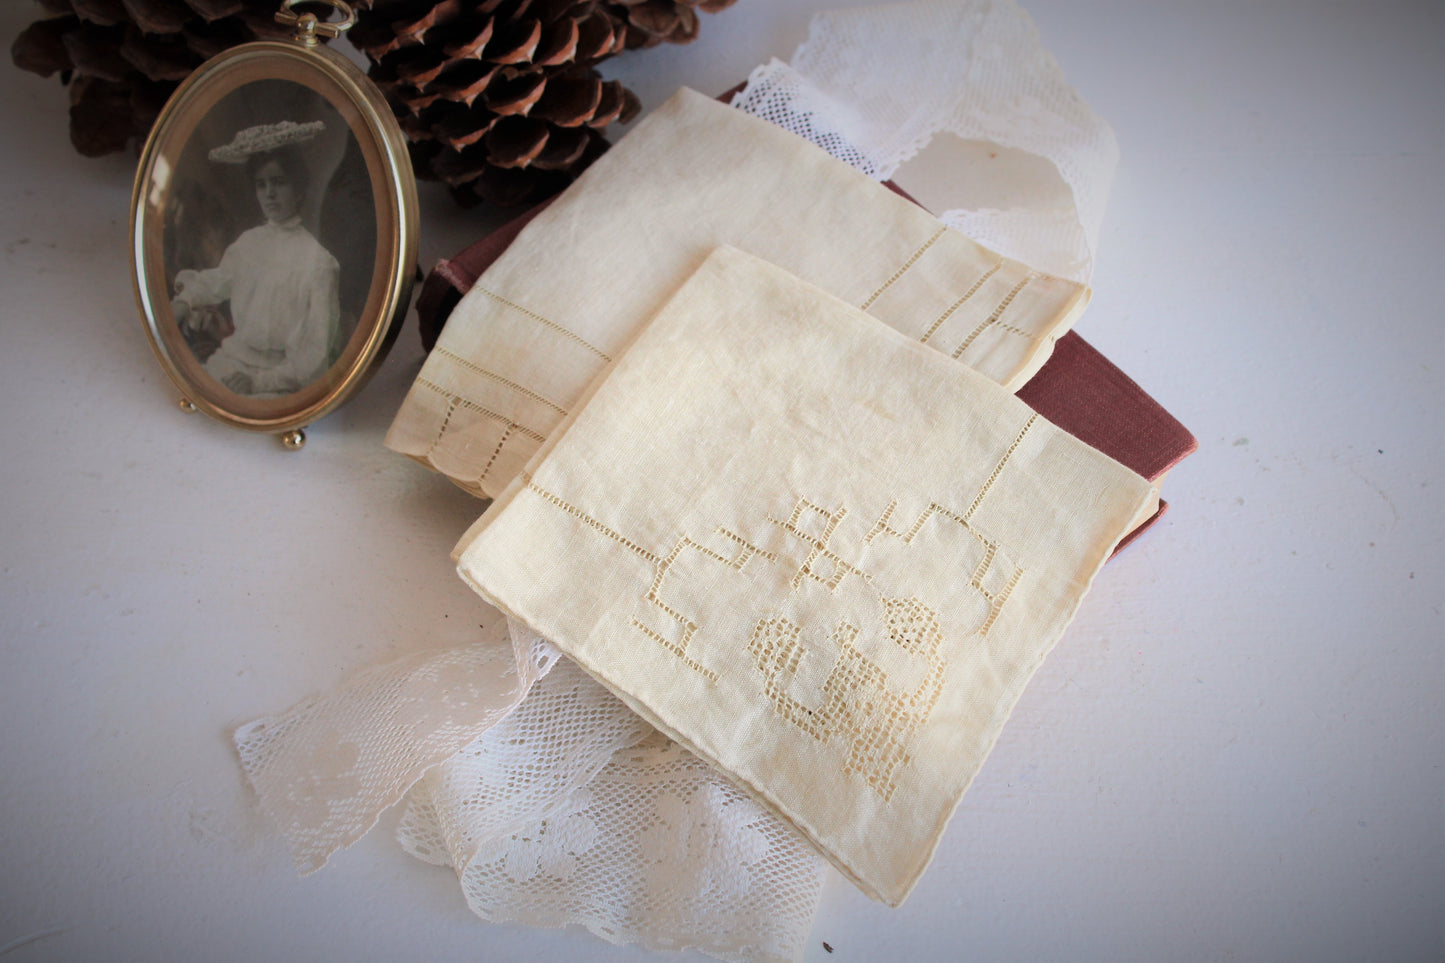 Set of Two Hand Plant Dyed Vintage Handkerchiefs in Dusty Ivory